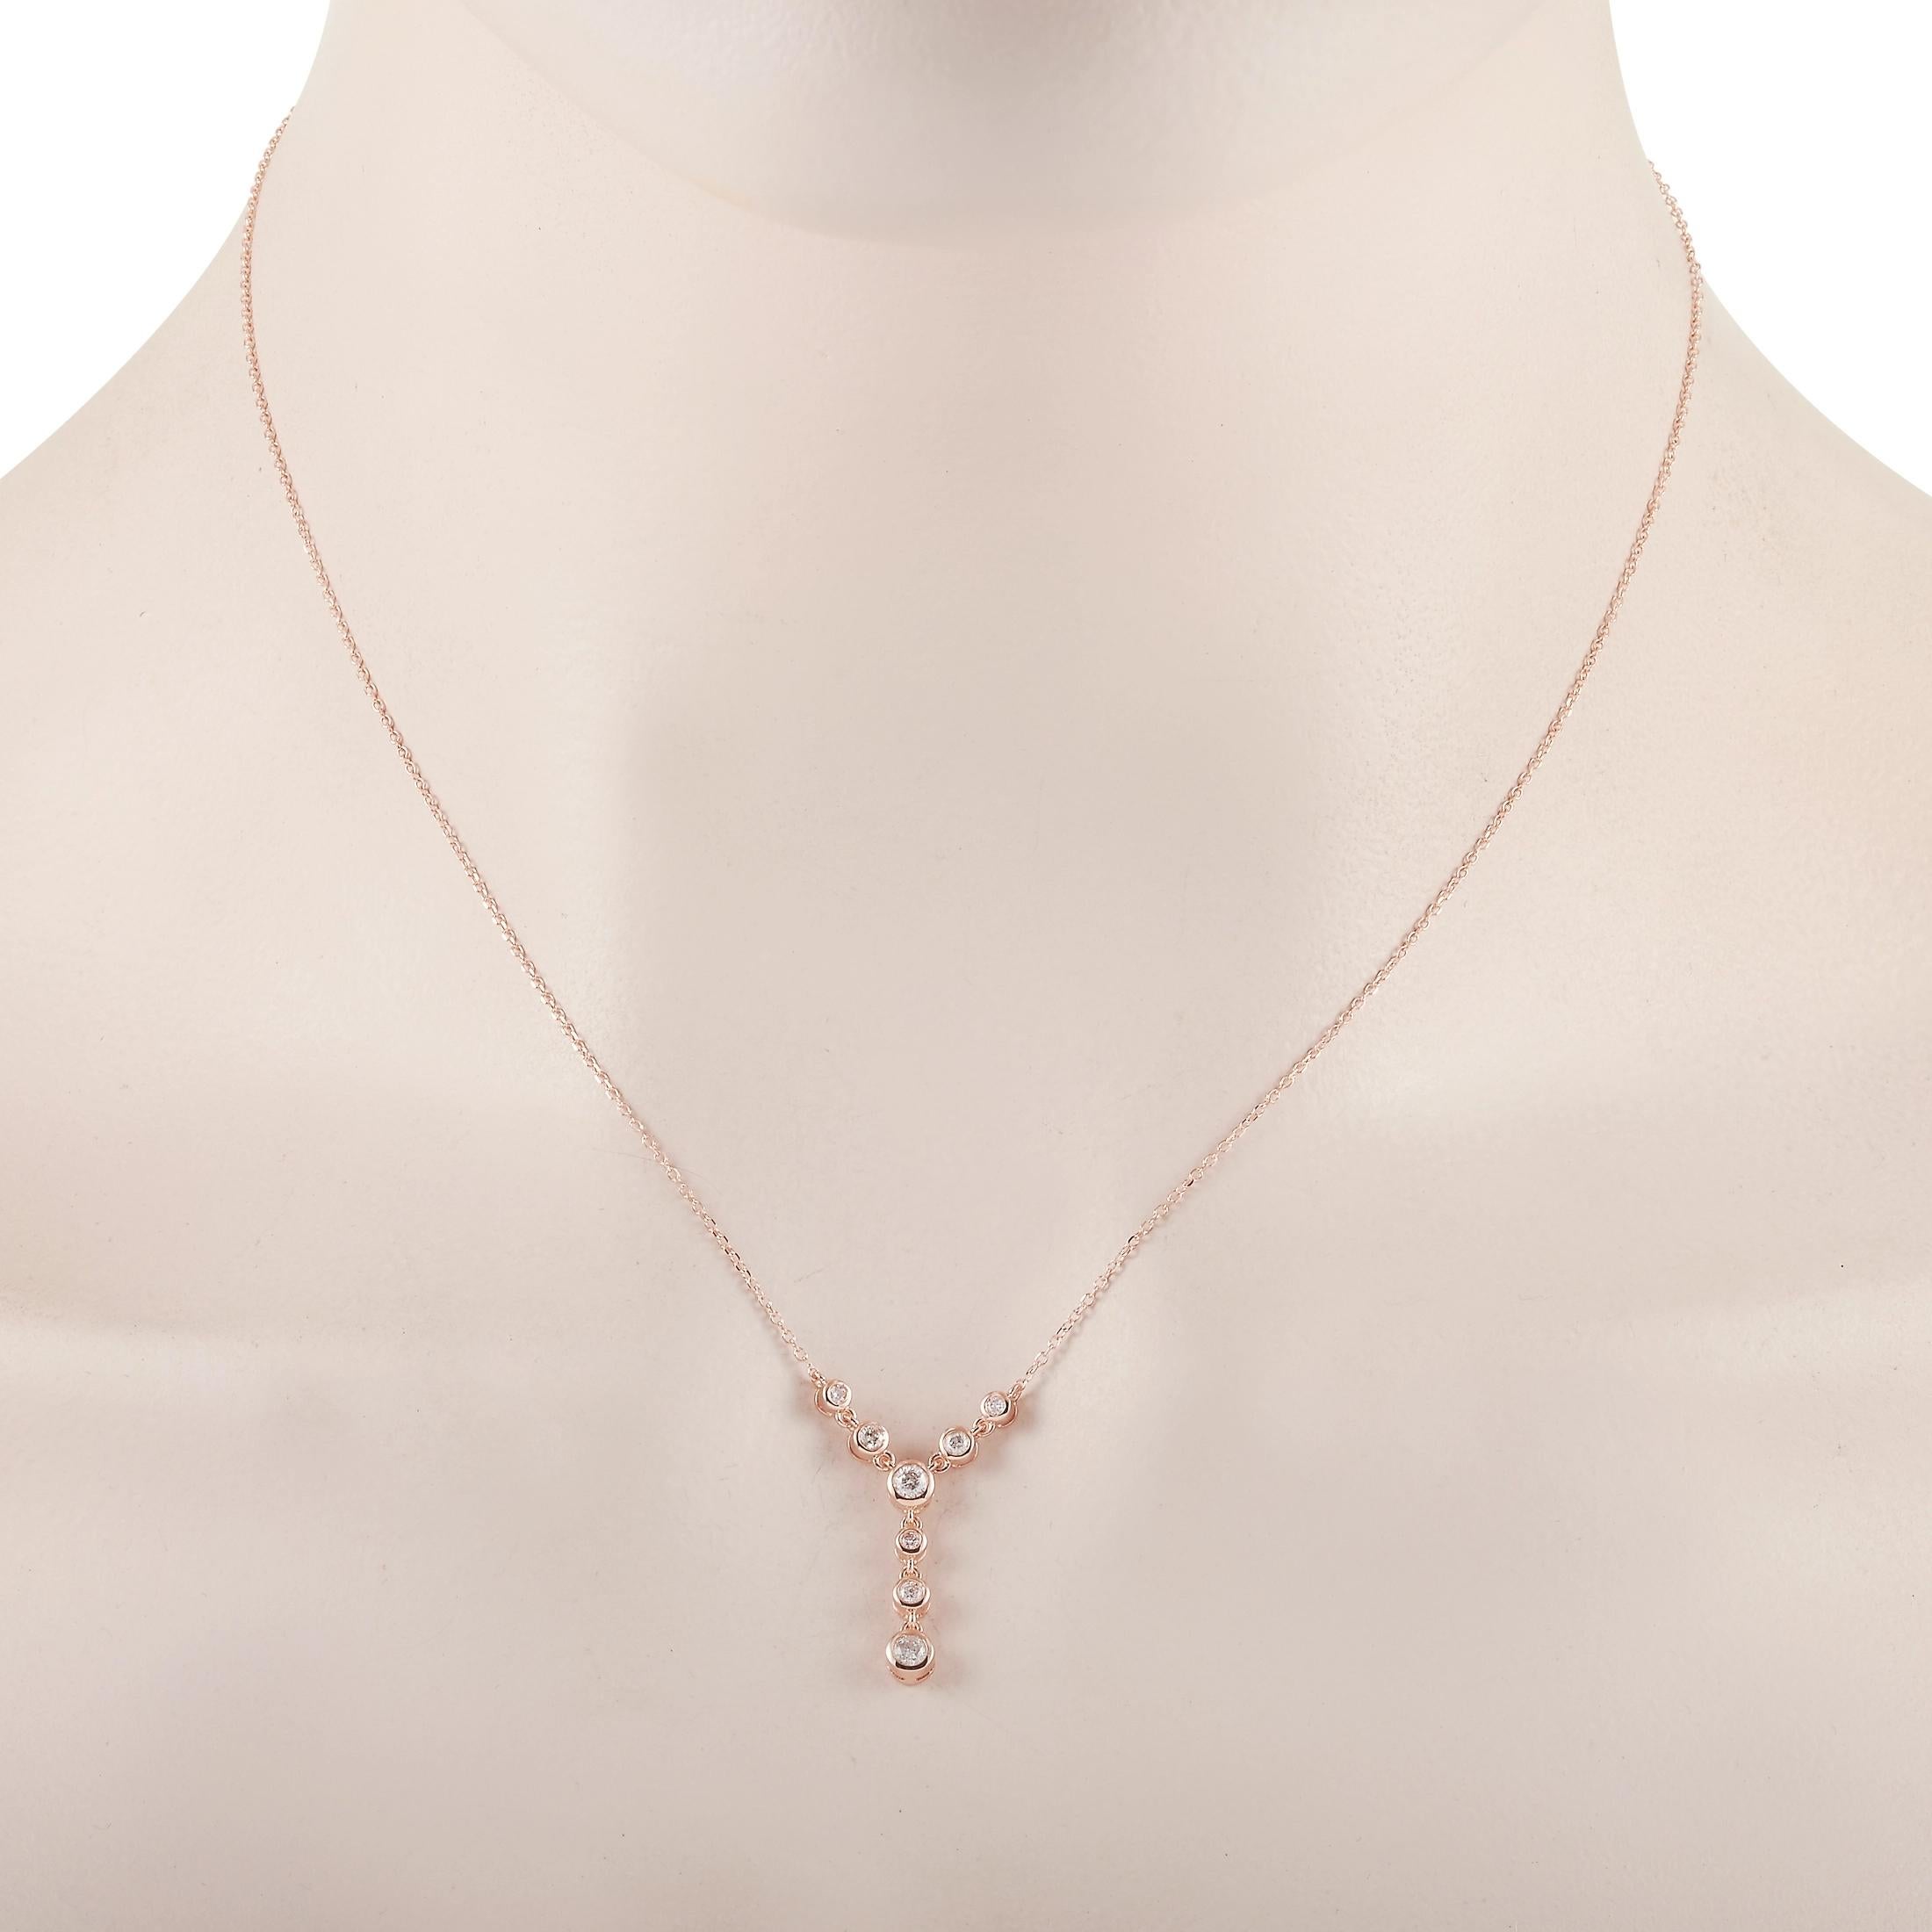 This LB Exclusive necklace is crafted from 14K rose gold and weighs 2.3 grams. It is presented with a 15” chain and boasts a pendant that measures 1” in length and 0.50” in width. The necklace is set with diamonds that total 0.25 carats.
 
 Offered